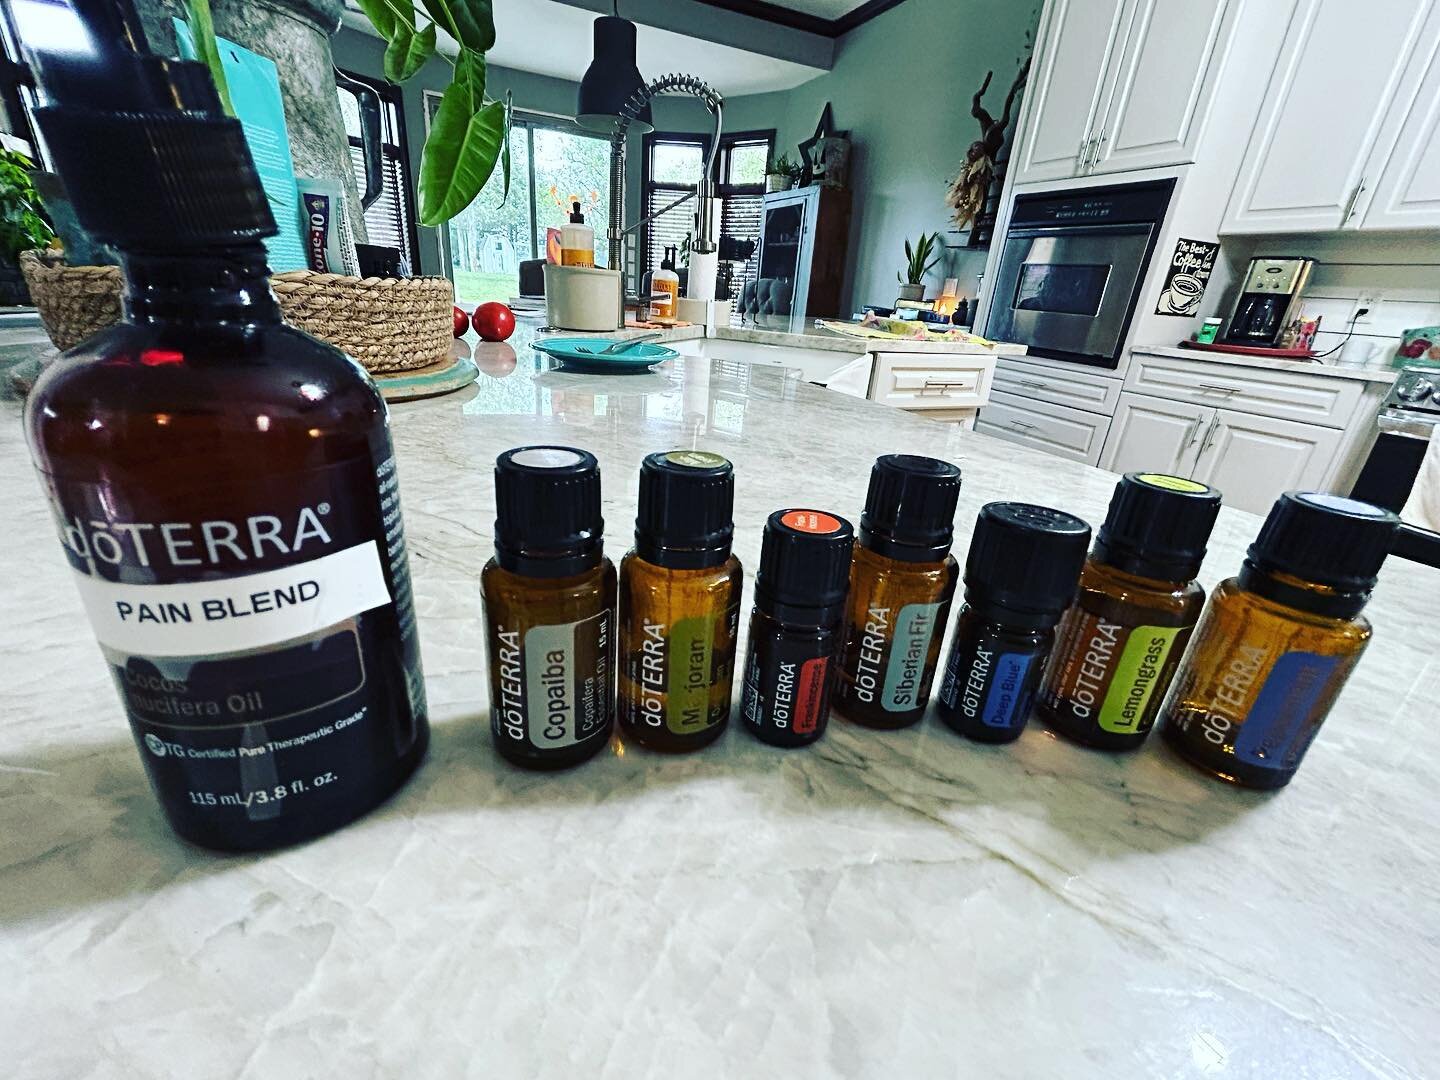 Nothing glamorous about this photo except that if you&rsquo;re looking for something to help support your aging muscles, tired and worn down joints and muscles, overworked body, etc&hellip;this blend is amazing. 

30 drops of each in a almost full bo